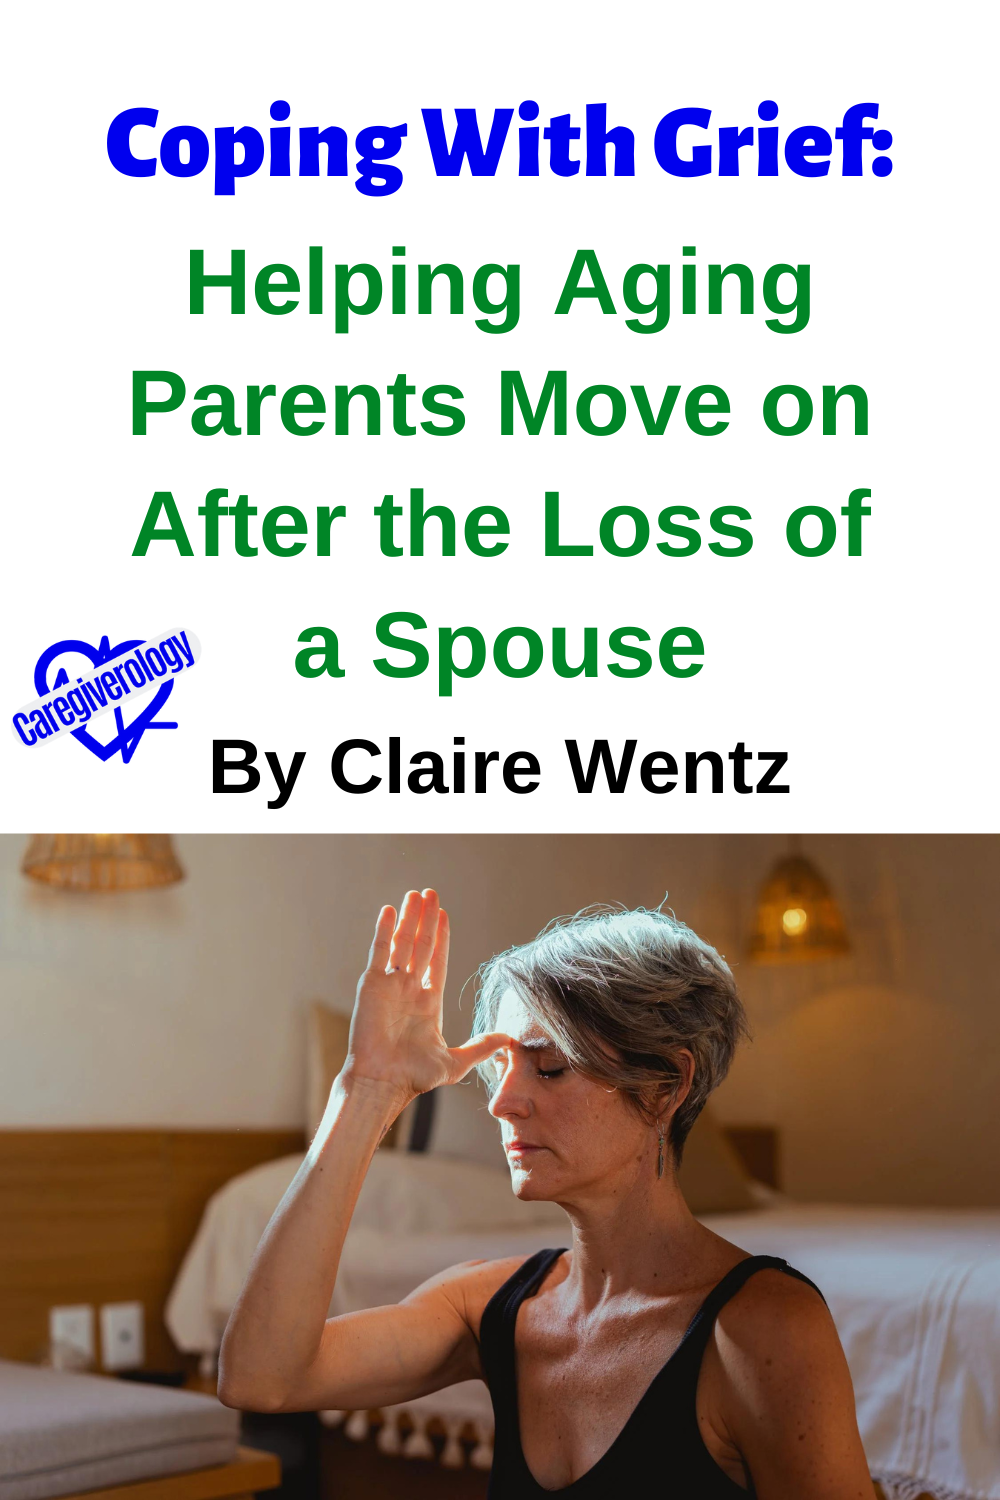 Coping With Grief: Helping Aging Parents Move on After the Loss of a Spouse